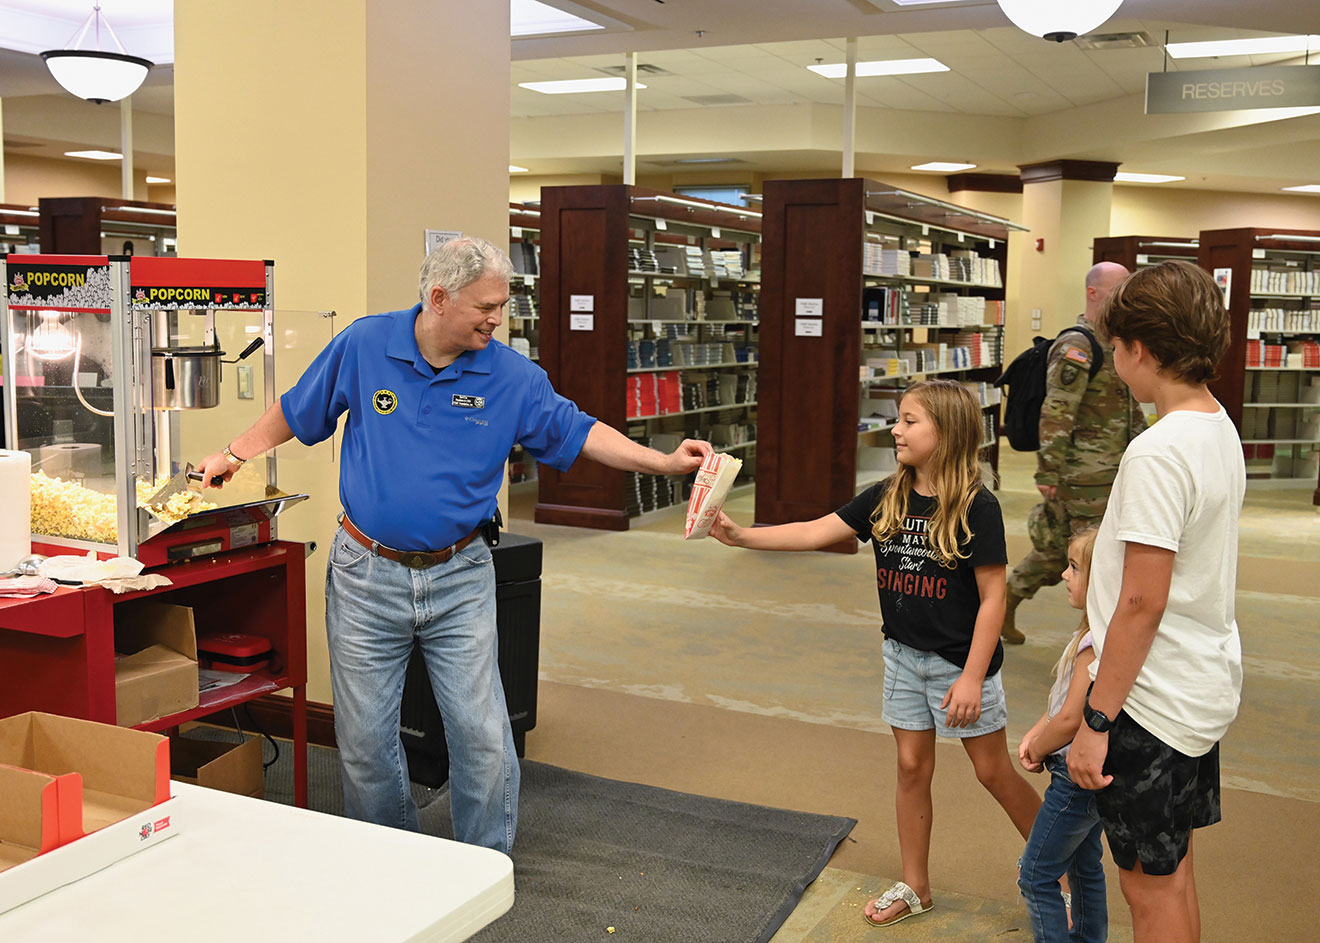 Foundation President/CEO Rod Cox manned the snack station providing popcorn, candy and water to all the families during the Ike Skelton Combined Arms Research Library open house on Aug. 11, 2023.